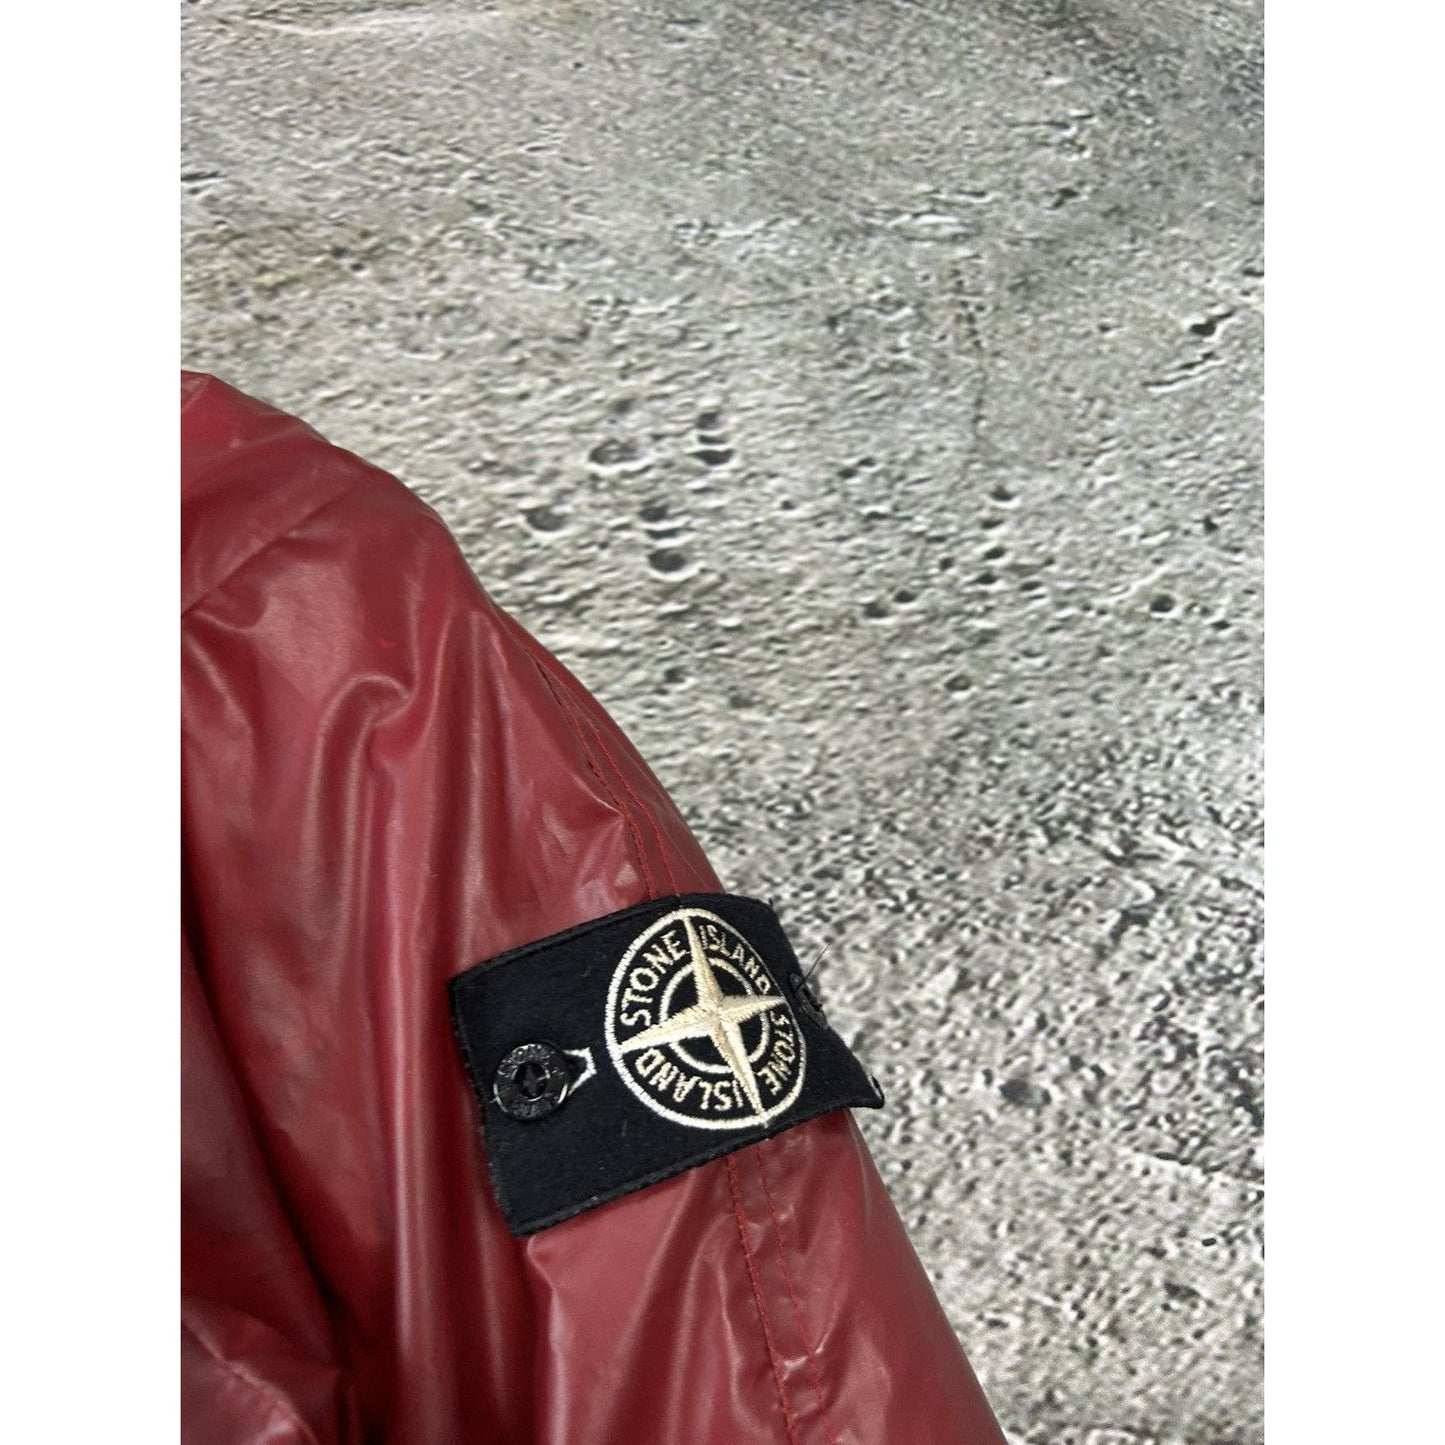 Stone Island Ice Jacket A/W 2010 red vintage down puffer